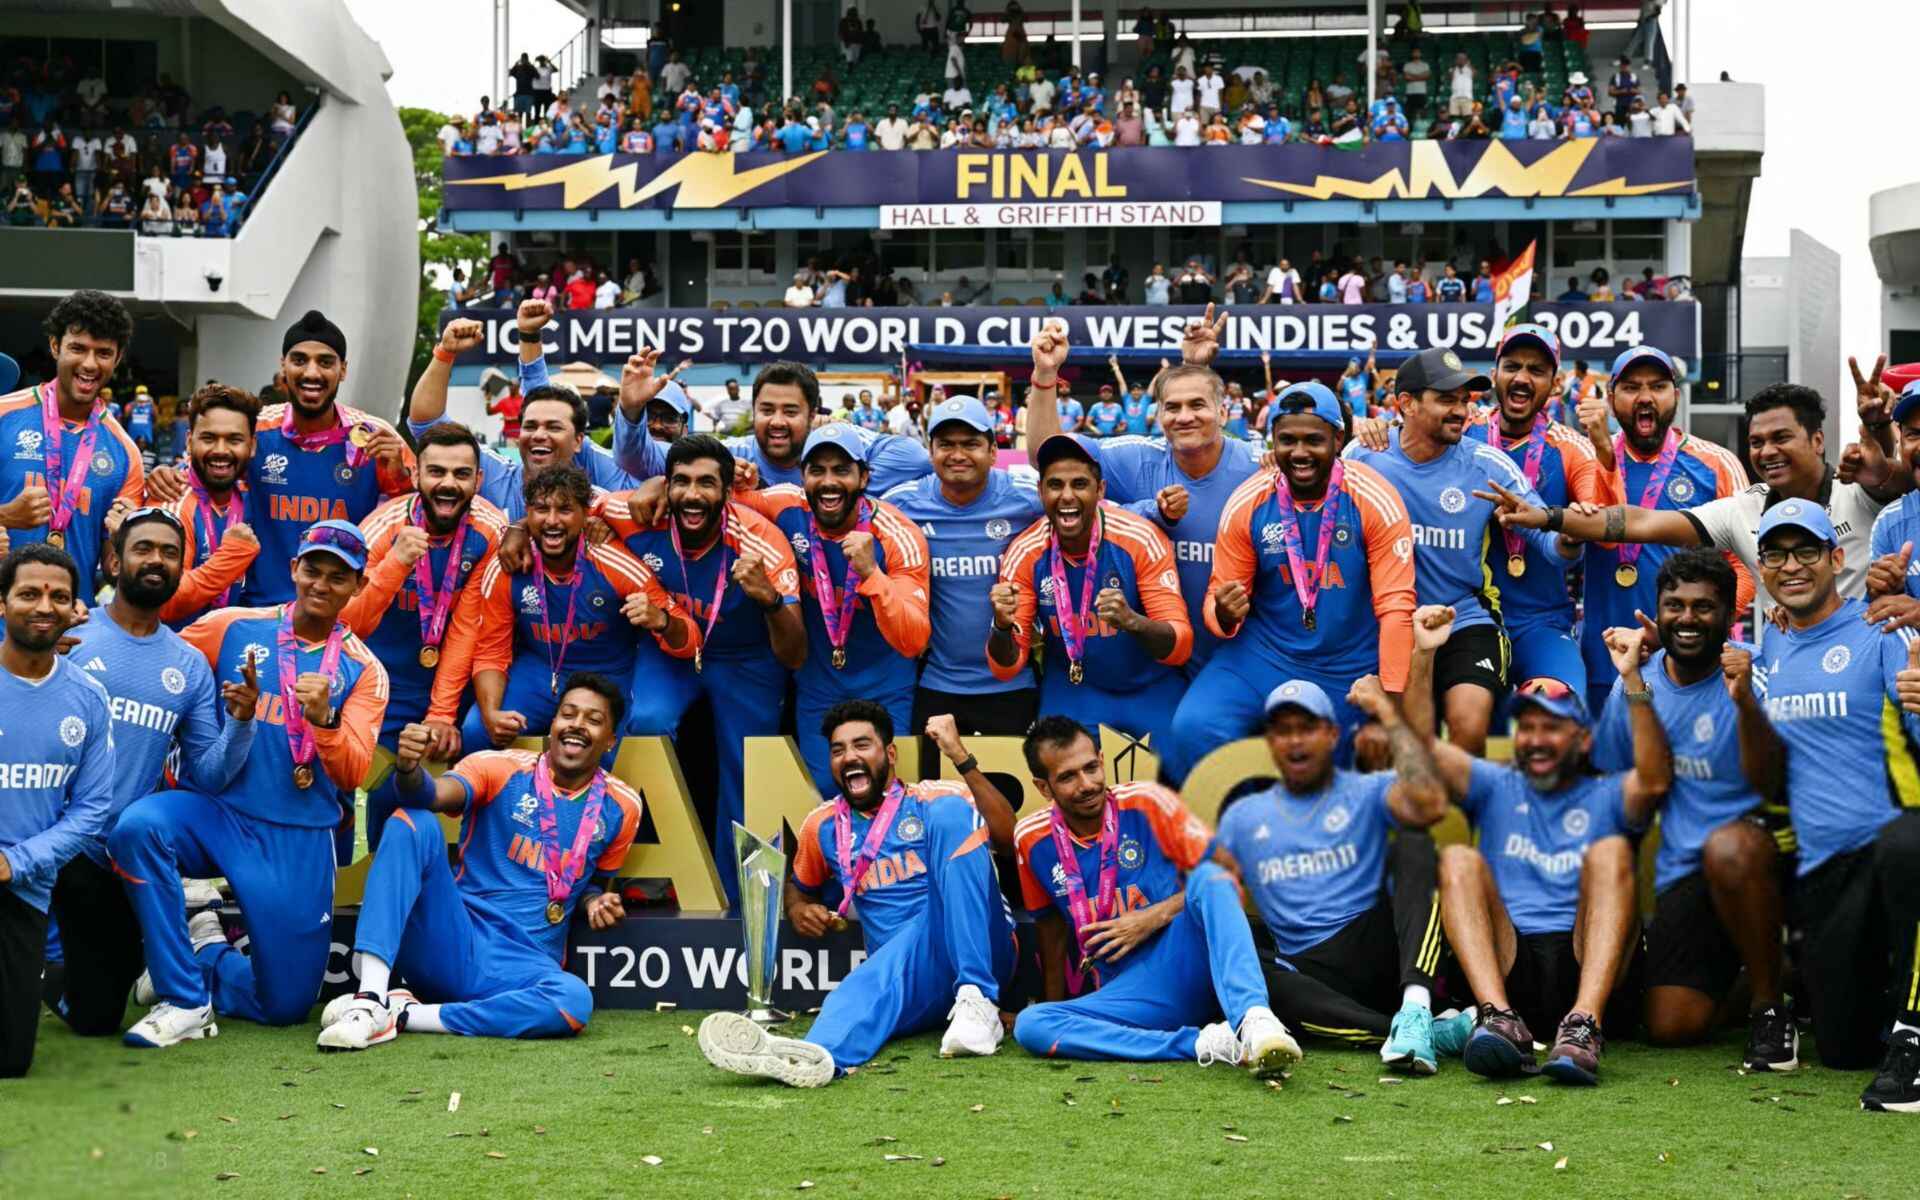 Jay Shah, Rohit Invite Fans To T20 World Cup Victory Parade At Marine Drive & Wankhede